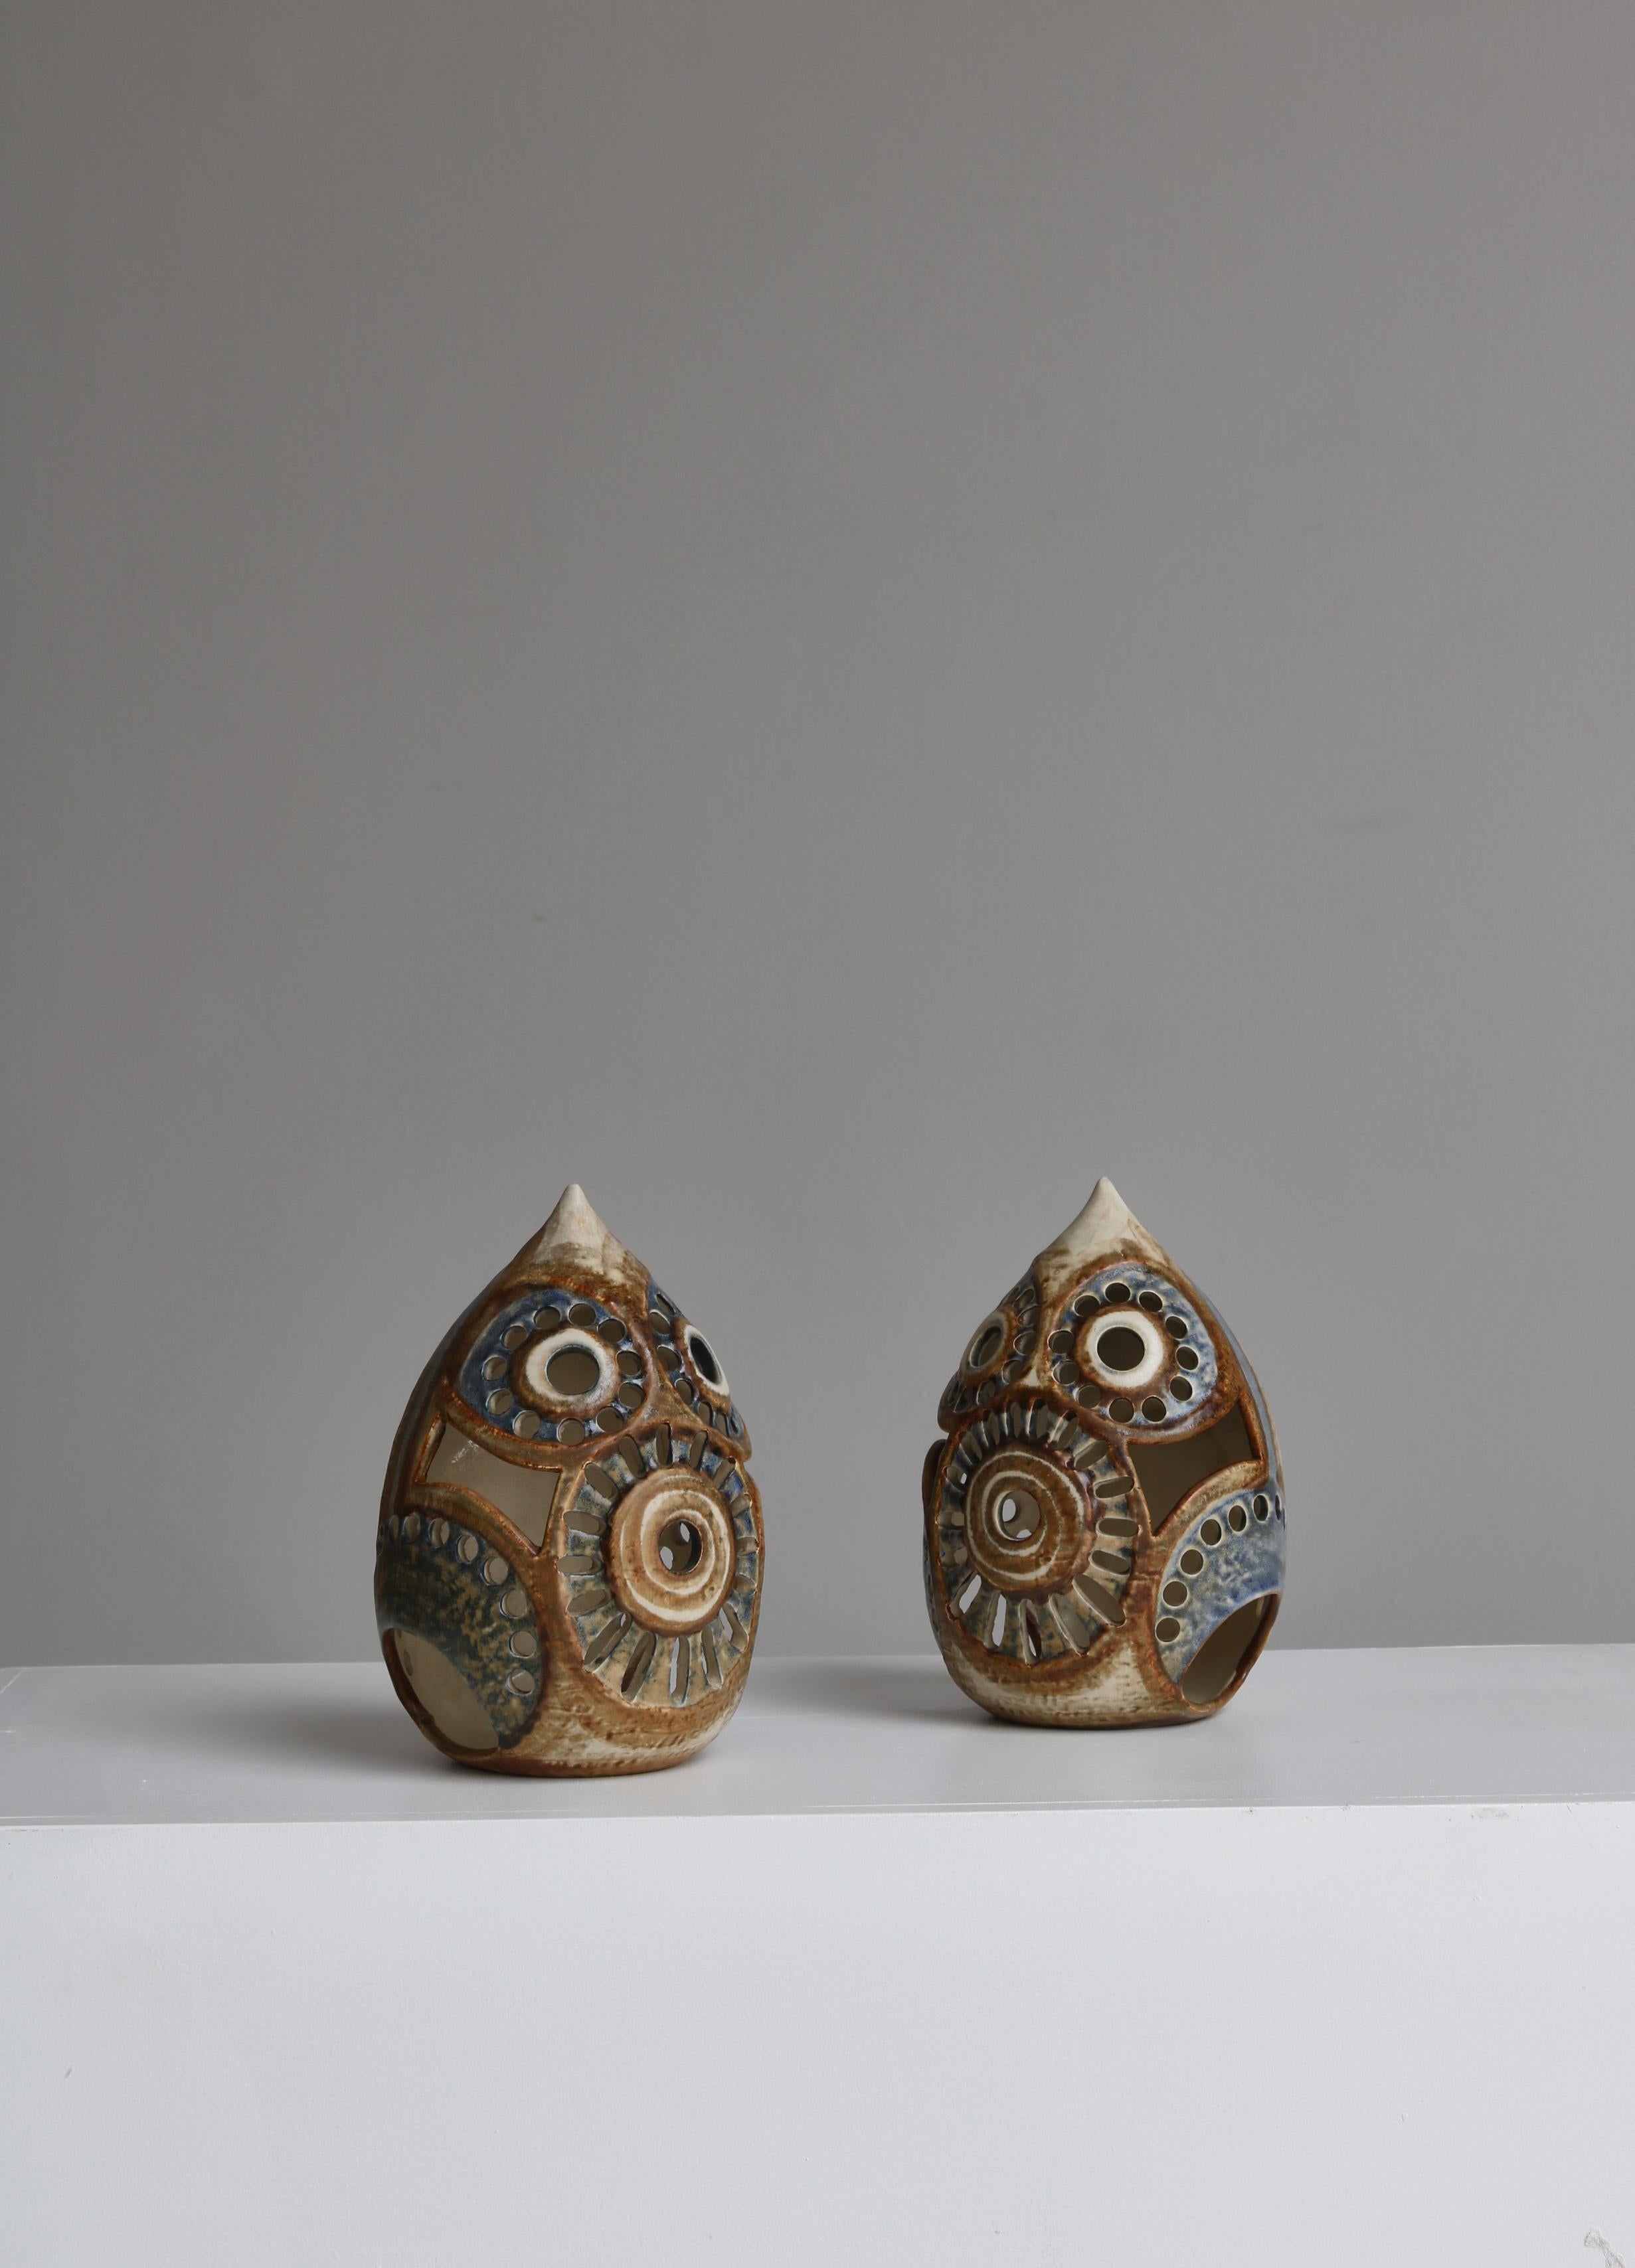 Wonderful pair of hand made candle lamps by Joseph Simon made at Søholm Pottery in Denmark in the 1960s. The lamps are made from hand decorated glazed stoneware. They can be used standing or hung at the wall. Joseph Simon worked at Søholm for a